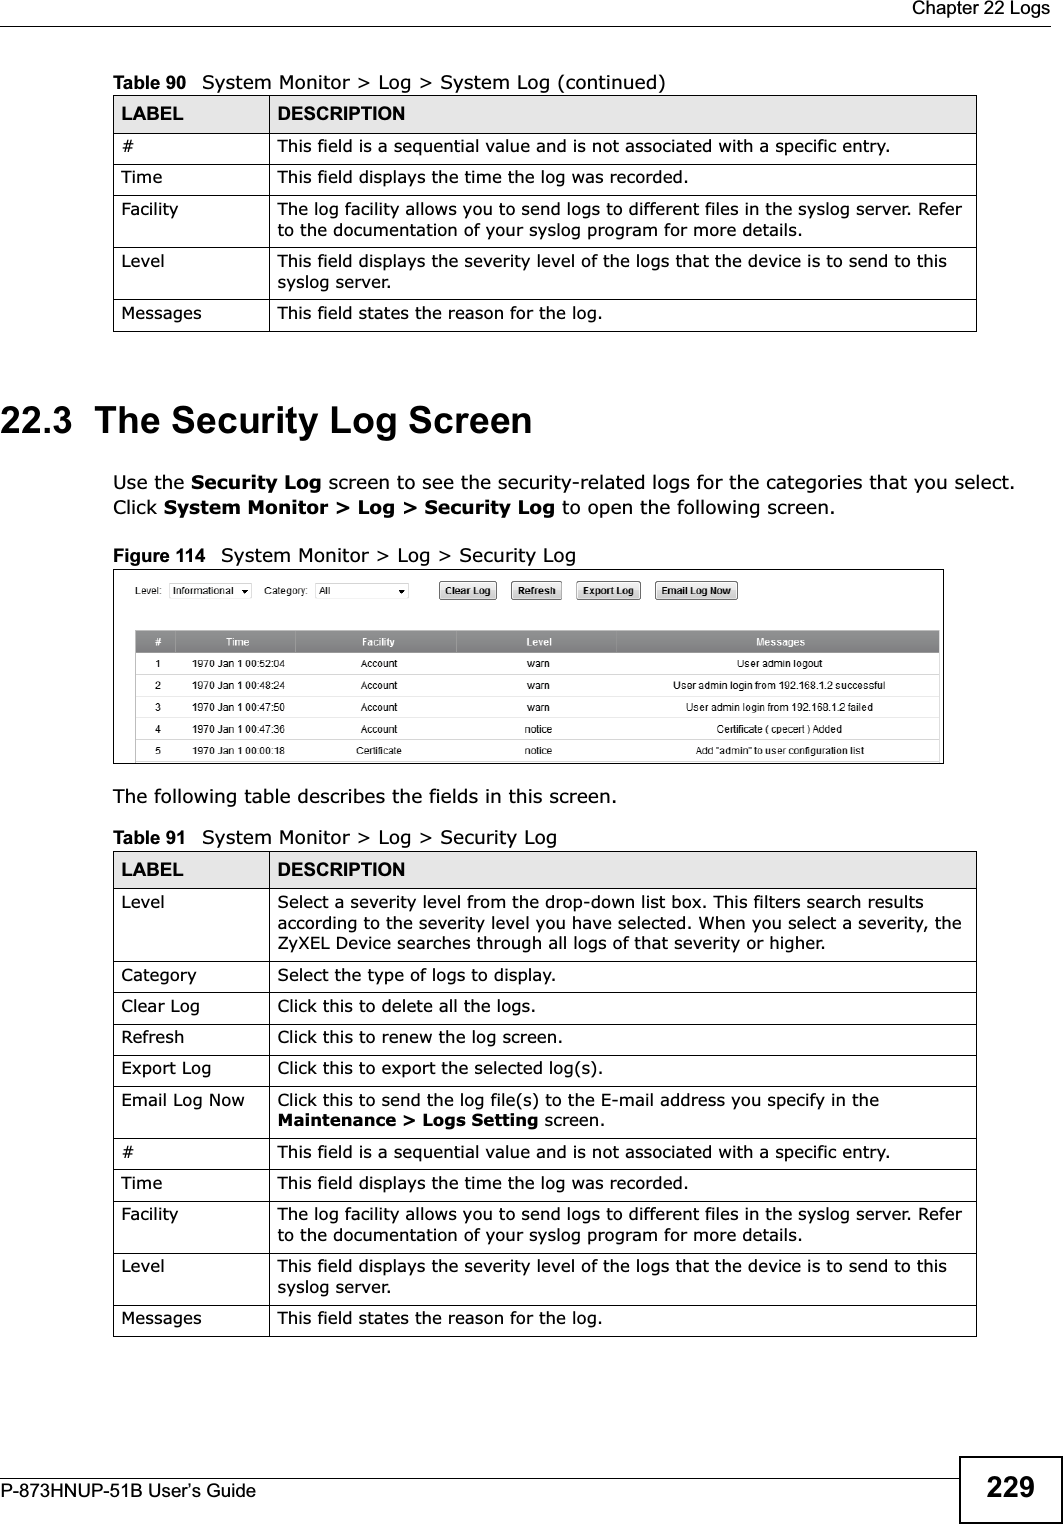  Chapter 22 LogsP-873HNUP-51B User’s Guide 22922.3  The Security Log ScreenUse the Security Log screen to see the security-related logs for the categories that you select. Click System Monitor &gt; Log &gt; Security Log to open the following screen. Figure 114   System Monitor &gt; Log &gt; Security LogThe following table describes the fields in this screen.   #This field is a sequential value and is not associated with a specific entry.Time  This field displays the time the log was recorded. Facility  The log facility allows you to send logs to different files in the syslog server. Refer to the documentation of your syslog program for more details.Level This field displays the severity level of the logs that the device is to send to this syslog server.Messages This field states the reason for the log.Table 90   System Monitor &gt; Log &gt; System Log (continued)LABEL DESCRIPTIONTable 91   System Monitor &gt; Log &gt; Security LogLABEL DESCRIPTIONLevel Select a severity level from the drop-down list box. This filters search results according to the severity level you have selected. When you select a severity, the ZyXEL Device searches through all logs of that severity or higher. Category Select the type of logs to display.Clear Log  Click this to delete all the logs. Refresh Click this to renew the log screen. Export Log Click this to export the selected log(s).Email Log Now Click this to send the log file(s) to the E-mail address you specify in the Maintenance &gt; Logs Setting screen.#This field is a sequential value and is not associated with a specific entry.Time  This field displays the time the log was recorded. Facility  The log facility allows you to send logs to different files in the syslog server. Refer to the documentation of your syslog program for more details.Level This field displays the severity level of the logs that the device is to send to this syslog server.Messages This field states the reason for the log.